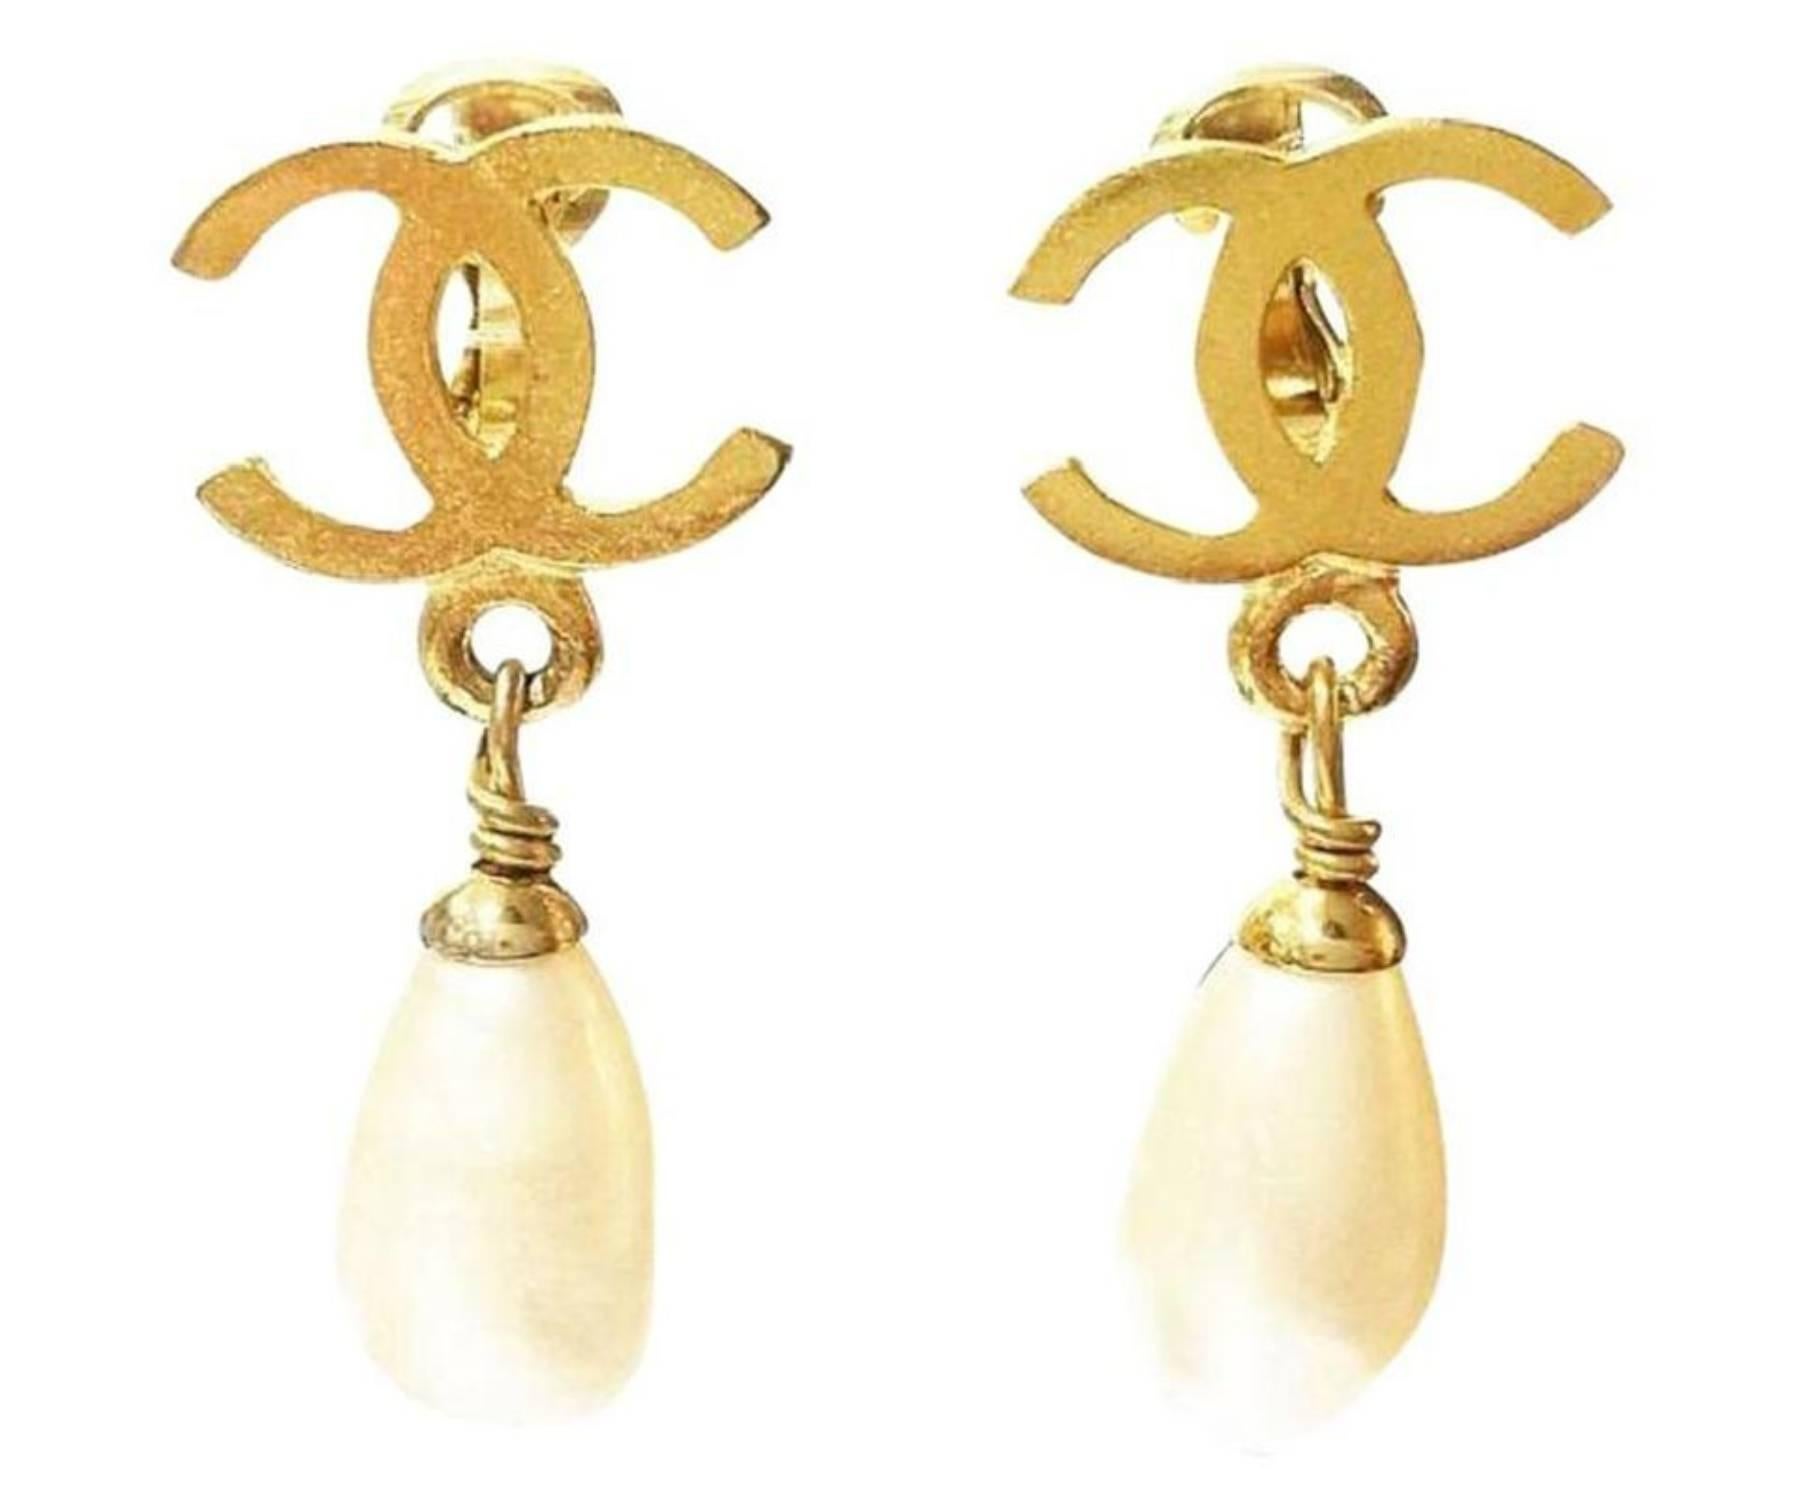 Chanel Vintage Gold Plated CC Pearl Dangle Clip on Earrings

* Marked 95
* Made in France
* Comes with the original box 

- It is approximately 1.25